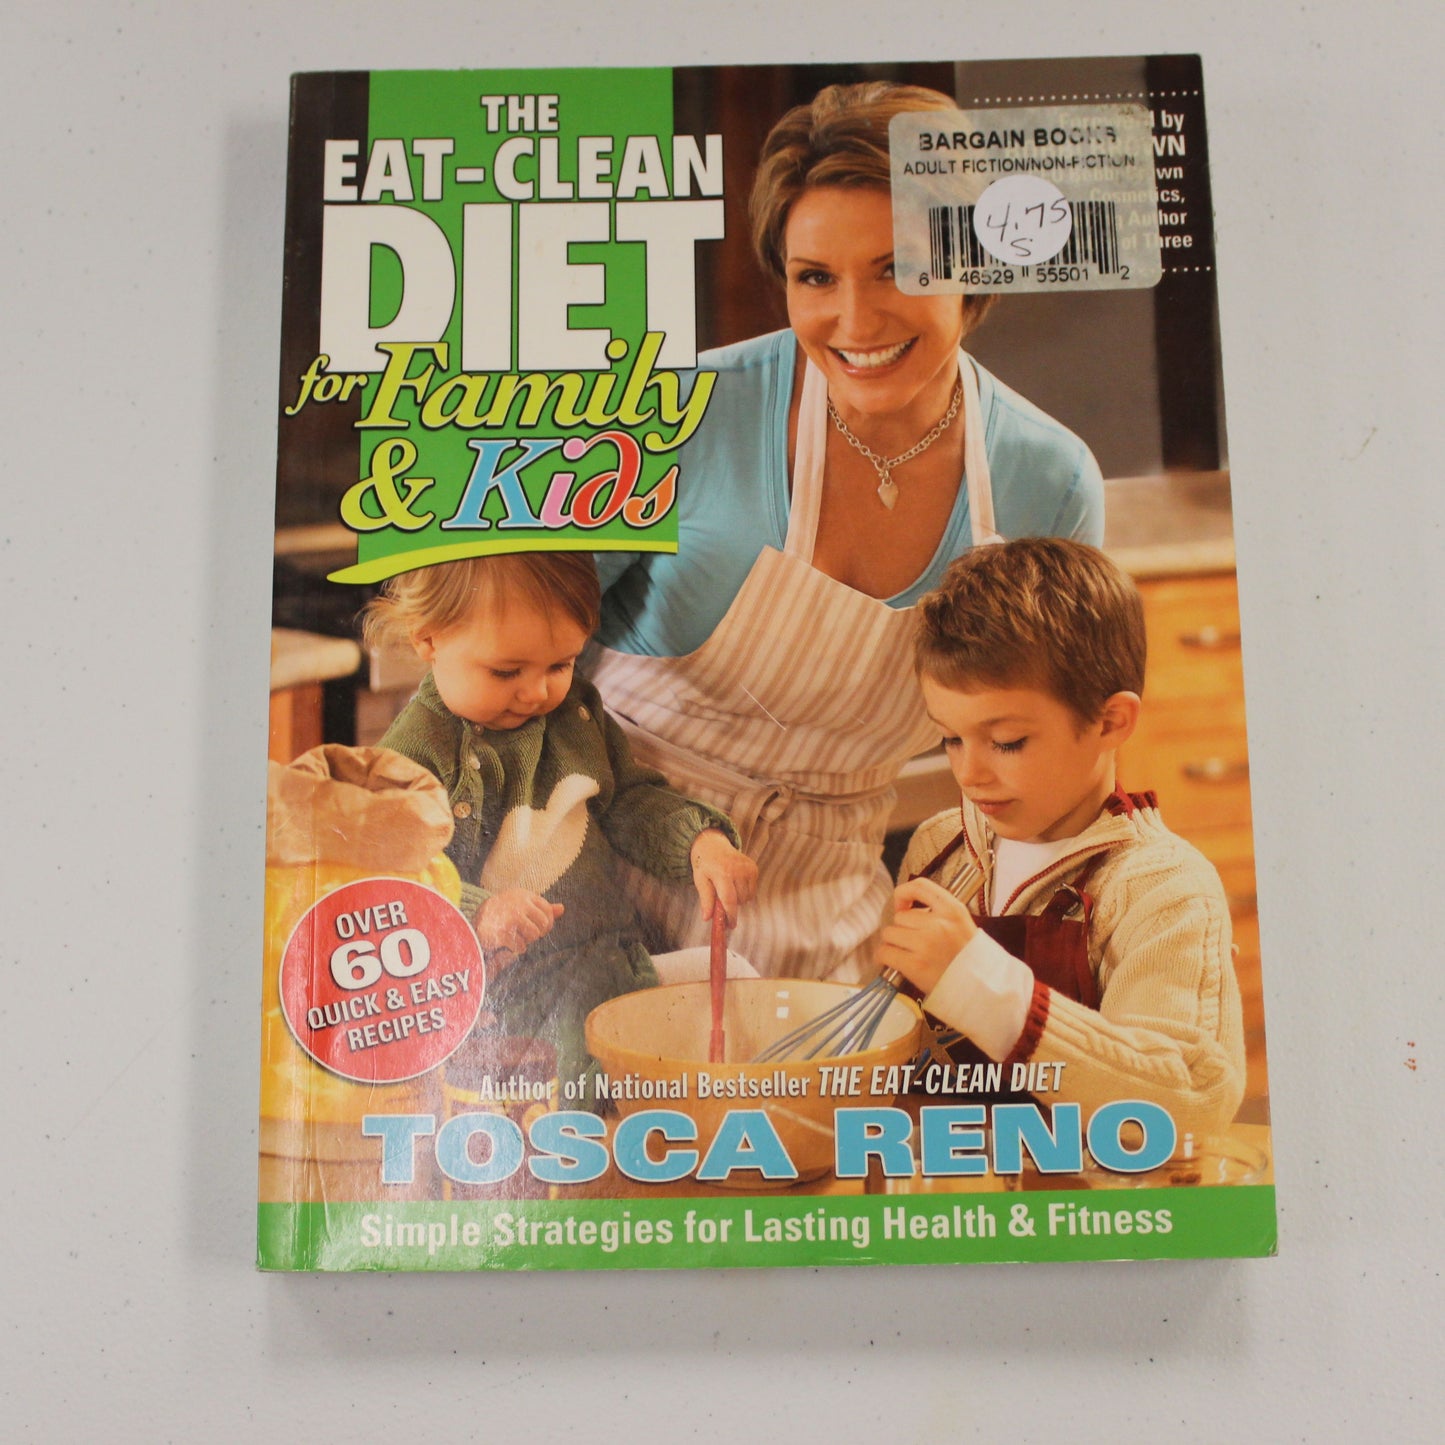 THE EAT-CLEAN DIET FOR FAMILY & KIDS